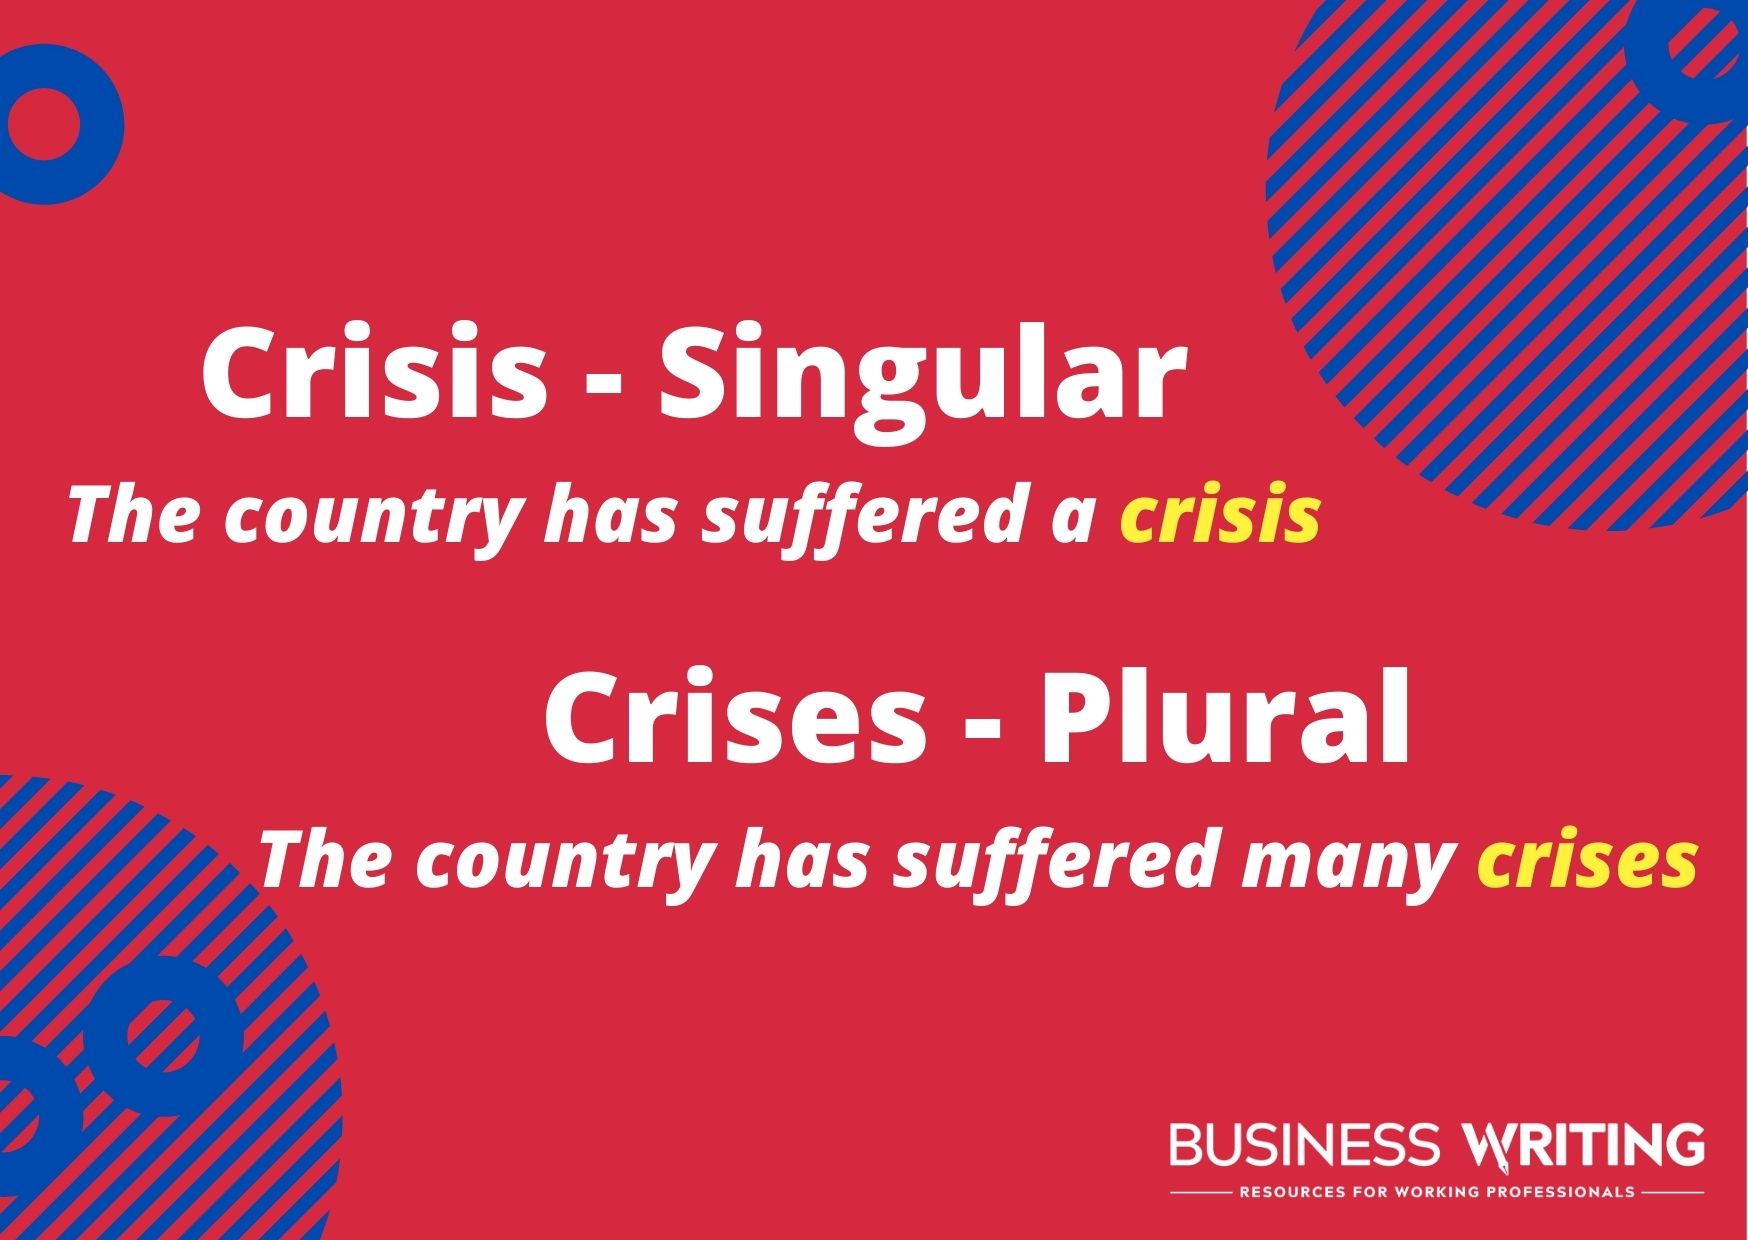 Graphic showing the difference between Crisis (singular) and Crises (plural) with phrases: "The country has suffered a crisis;" and "the country has suffered many crises"